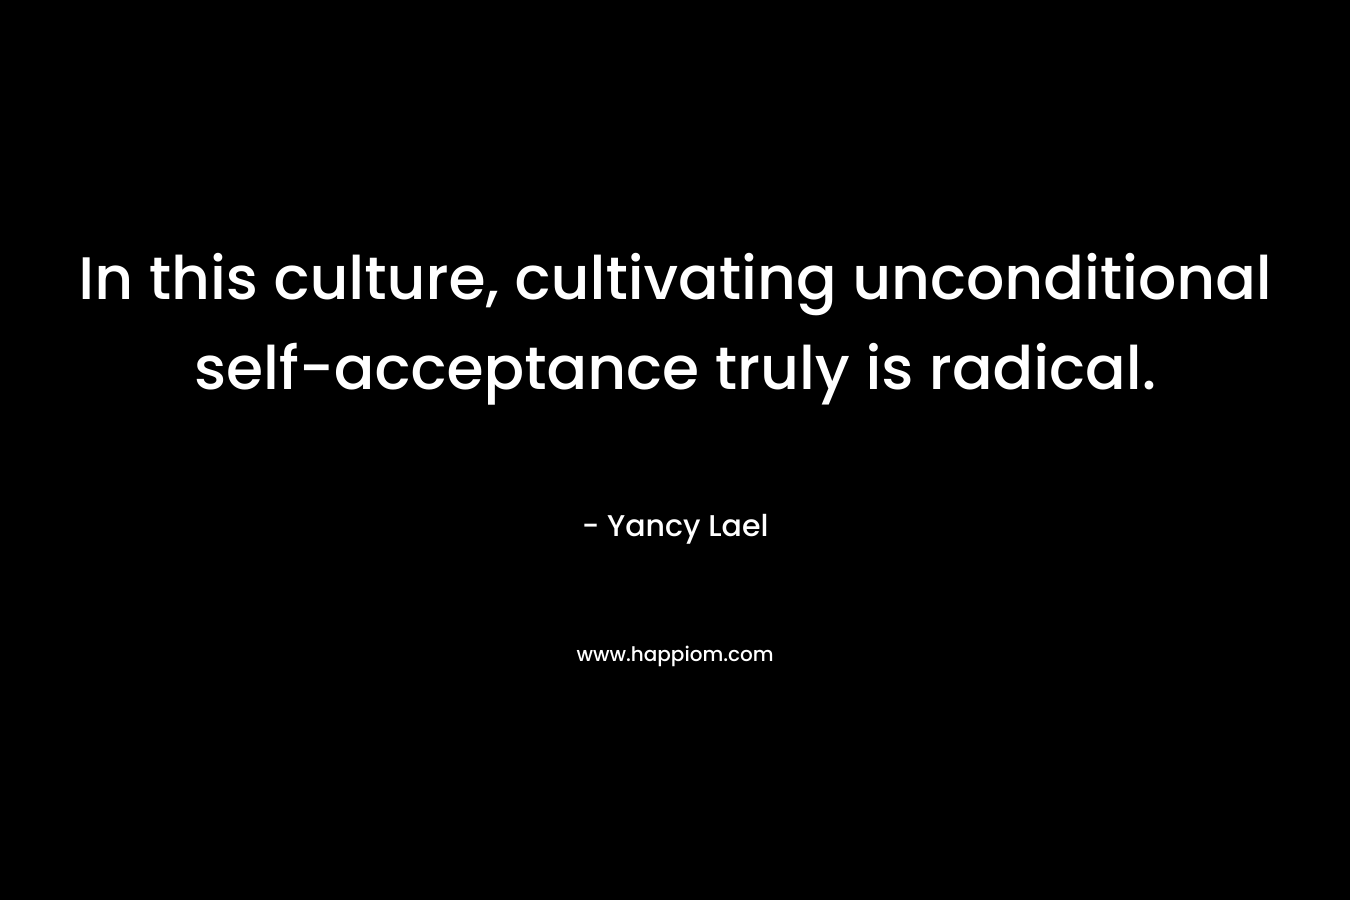 In this culture, cultivating unconditional self-acceptance truly is radical. – Yancy Lael